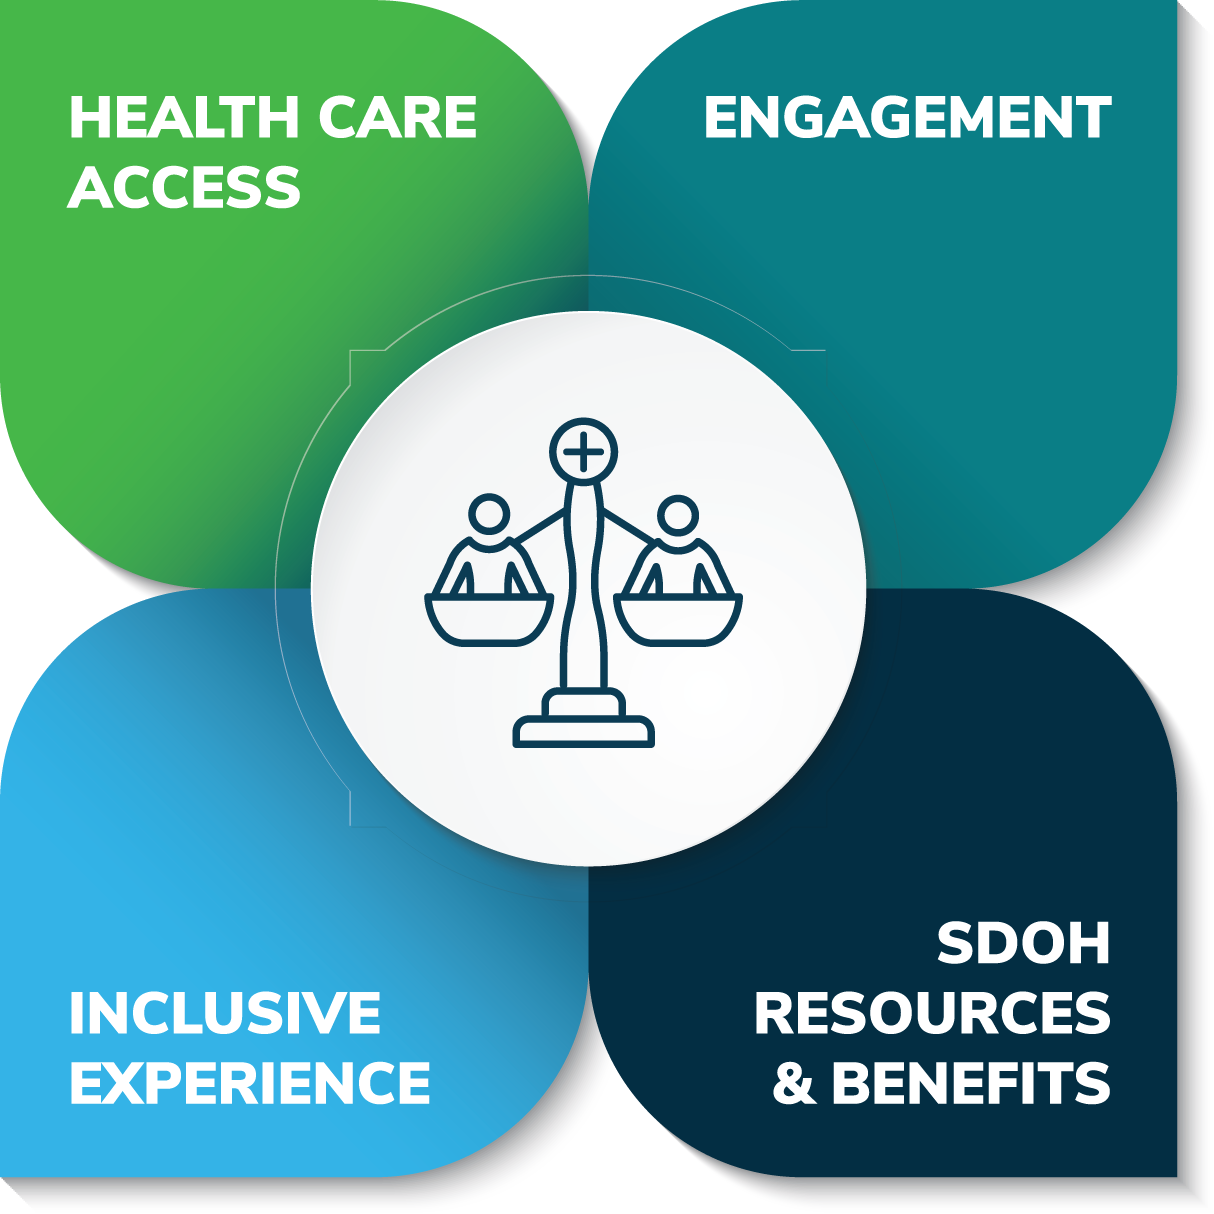 health care access, equitable engagement, inclusive experience, Social Determinants of Health